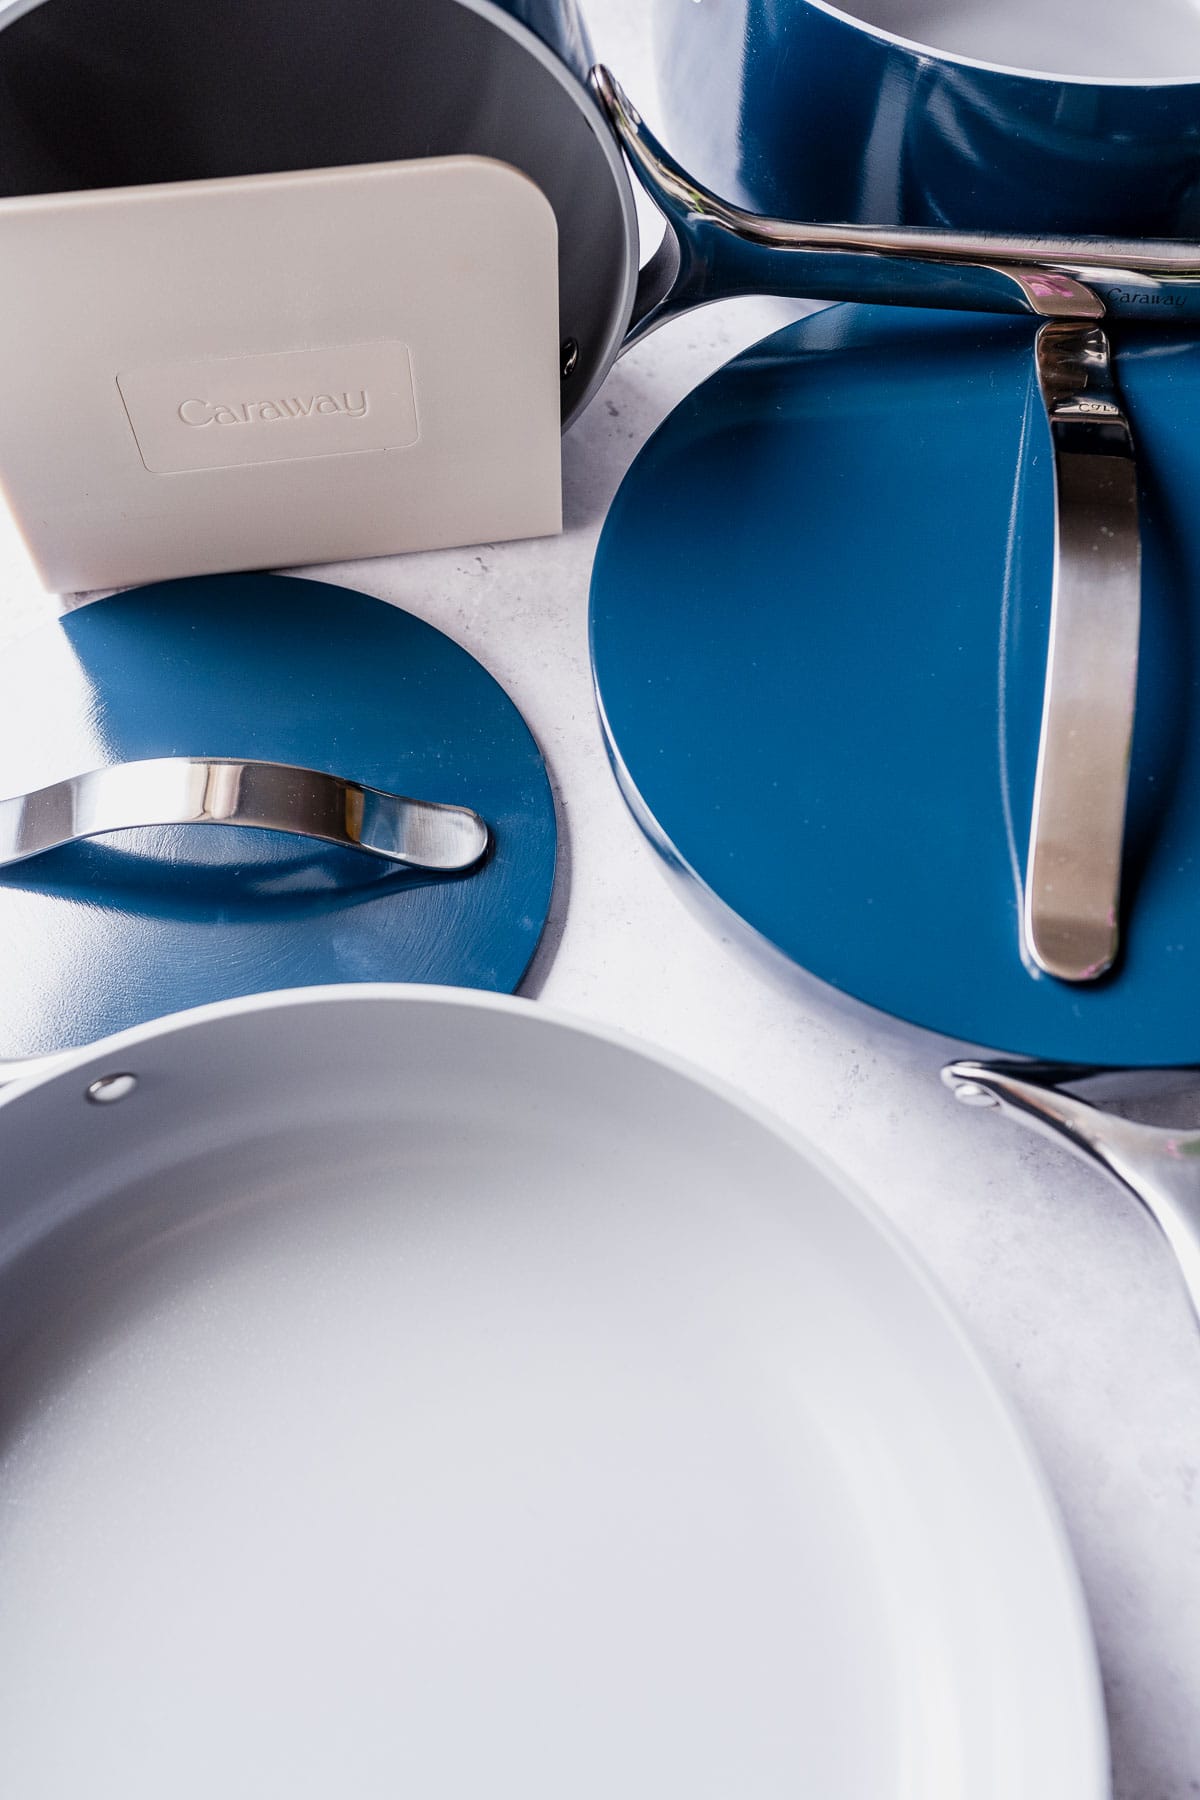 A navy colored Caraway cookware set  resting on a gray table.